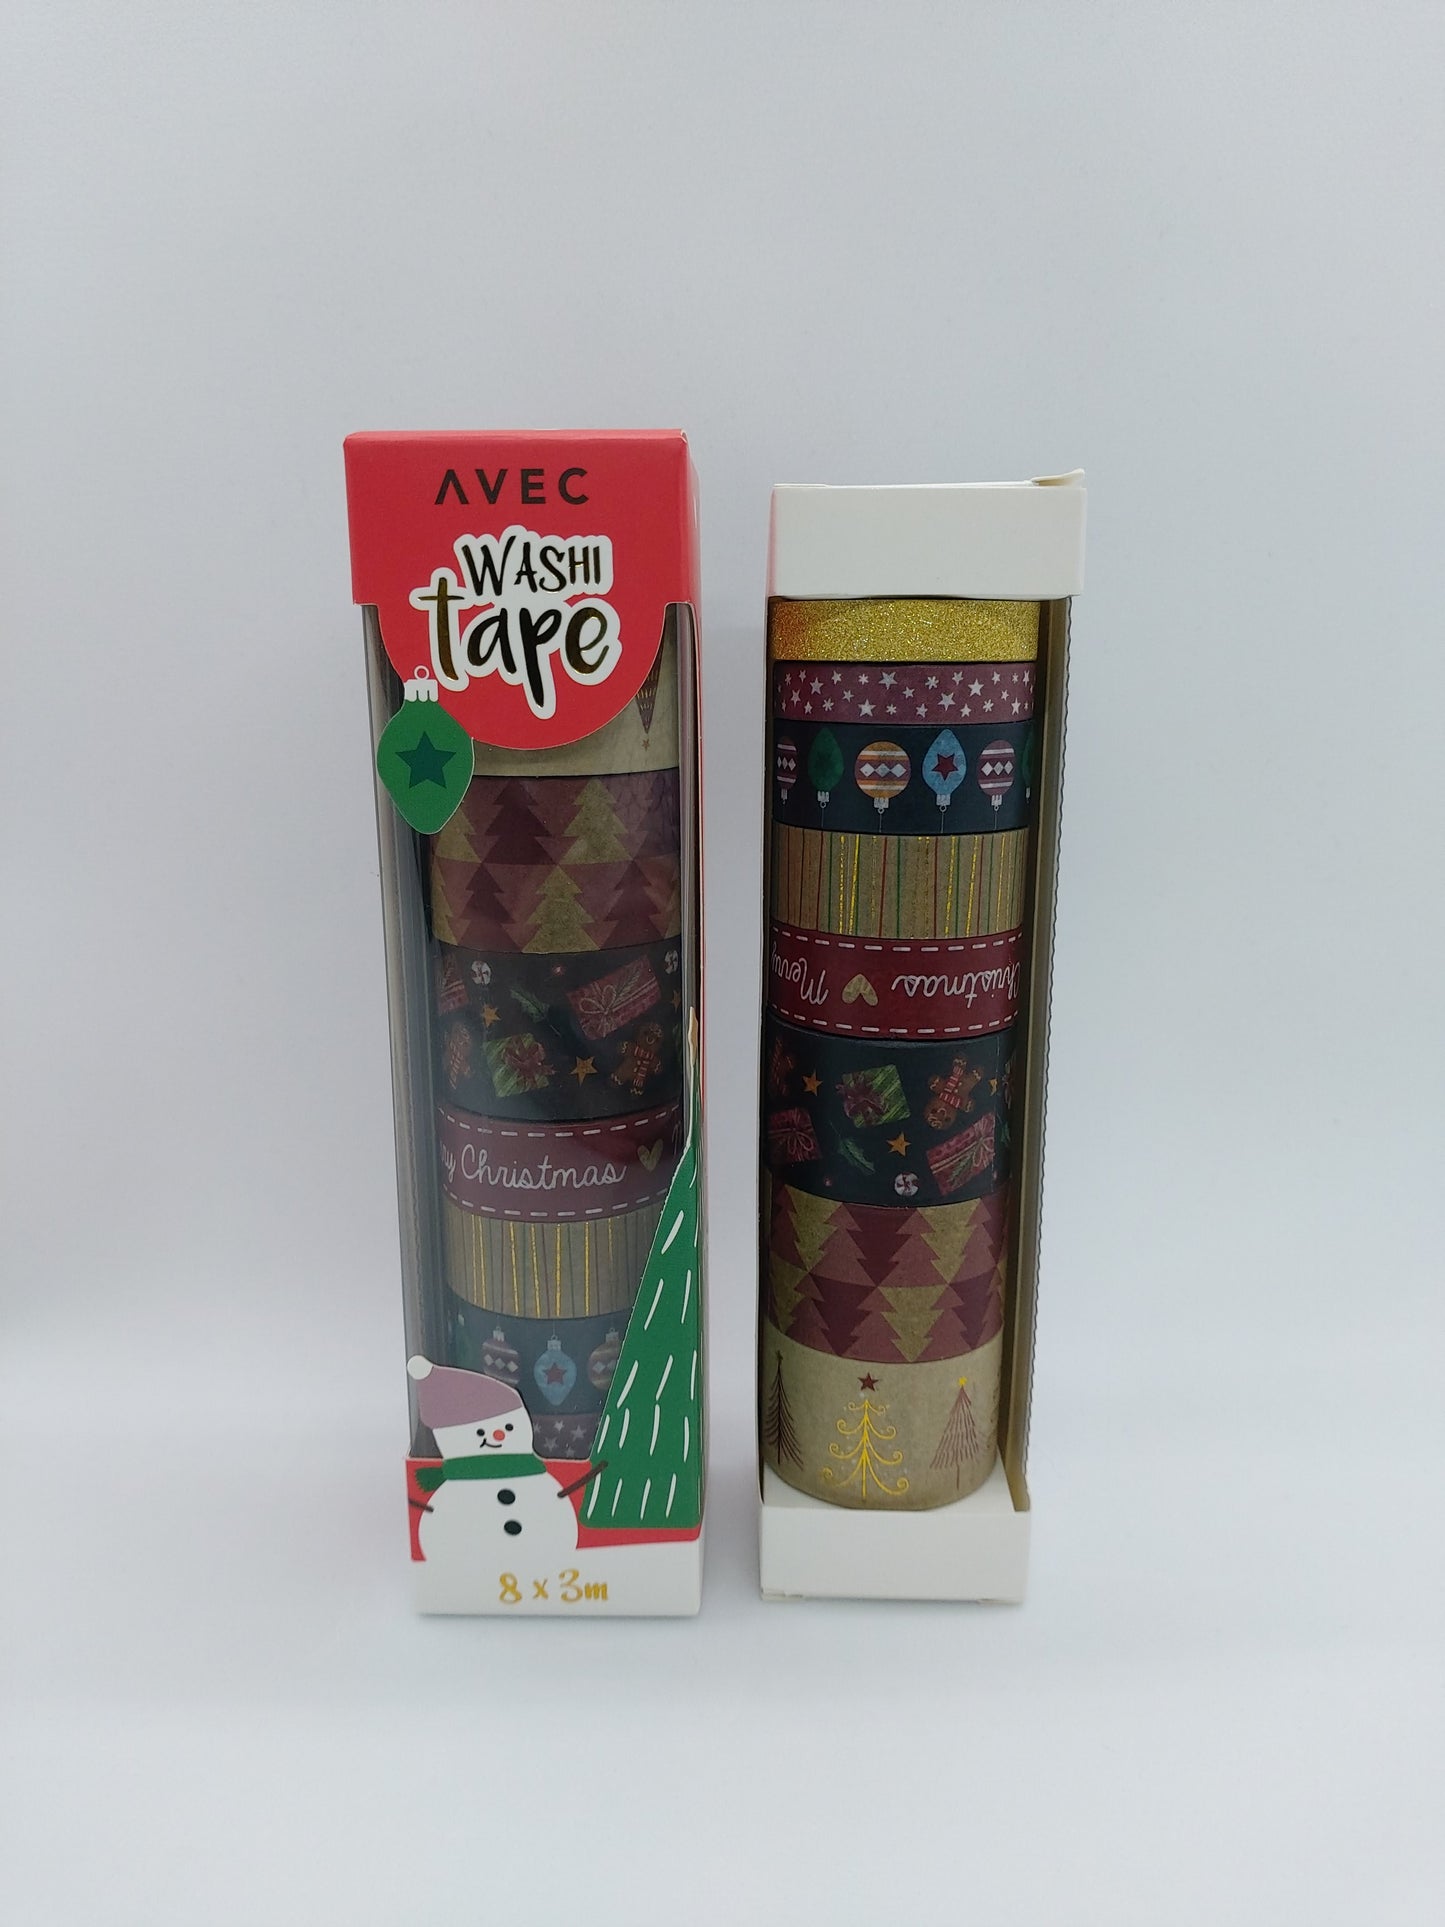 Weihnachts-Washi-Tapes 8 St. a 3m (Snowman) AVEC